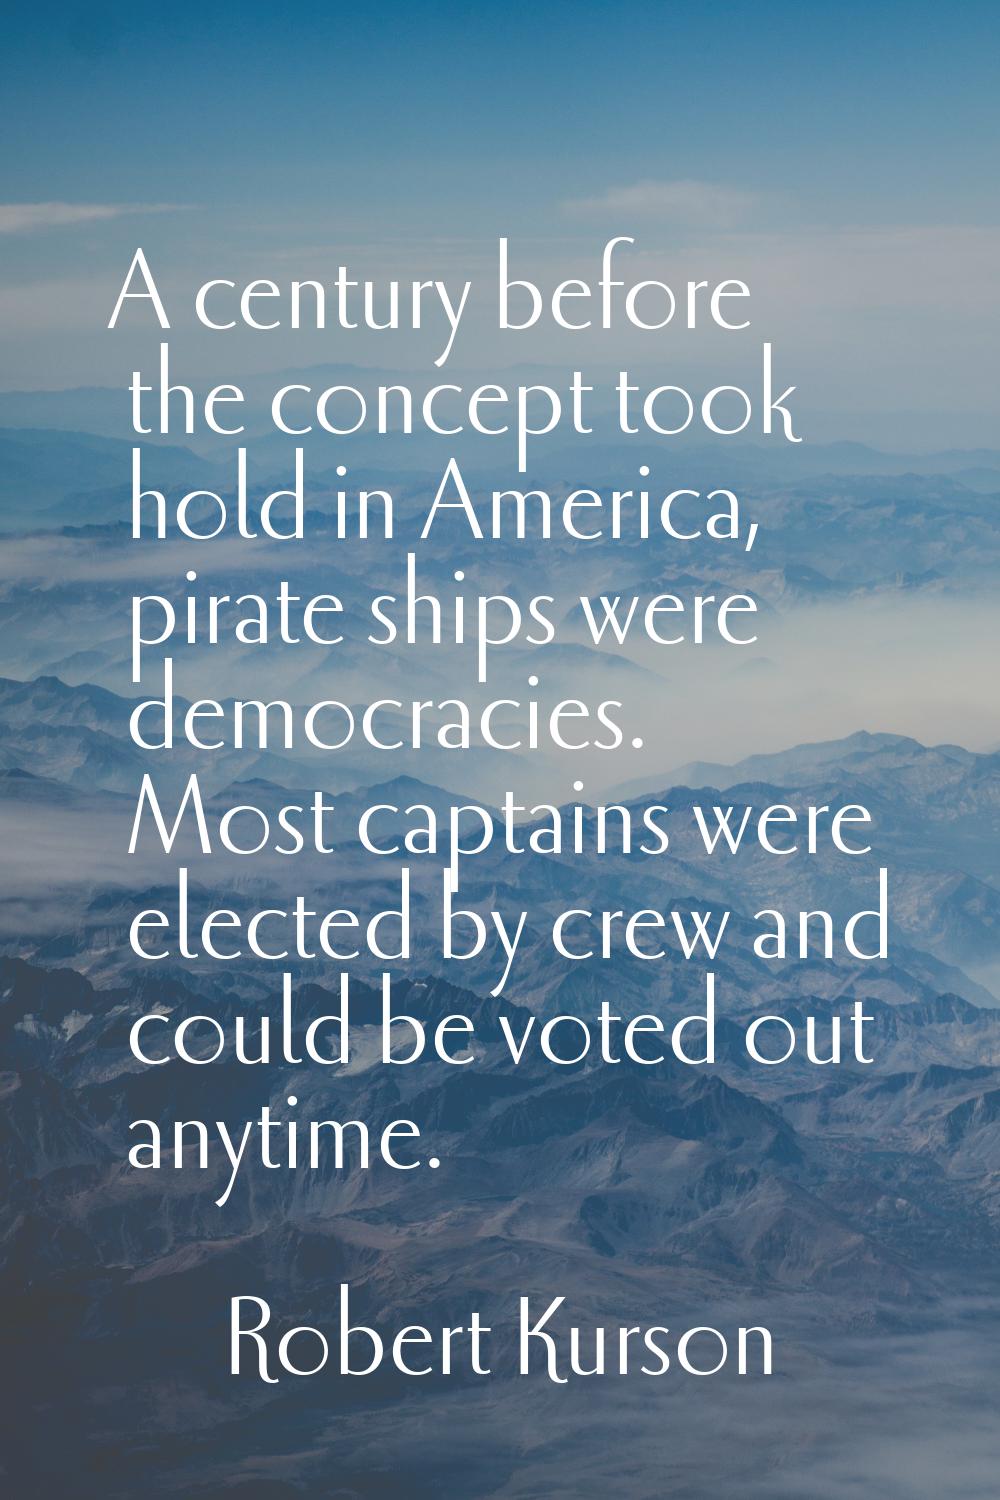 A century before the concept took hold in America, pirate ships were democracies. Most captains wer